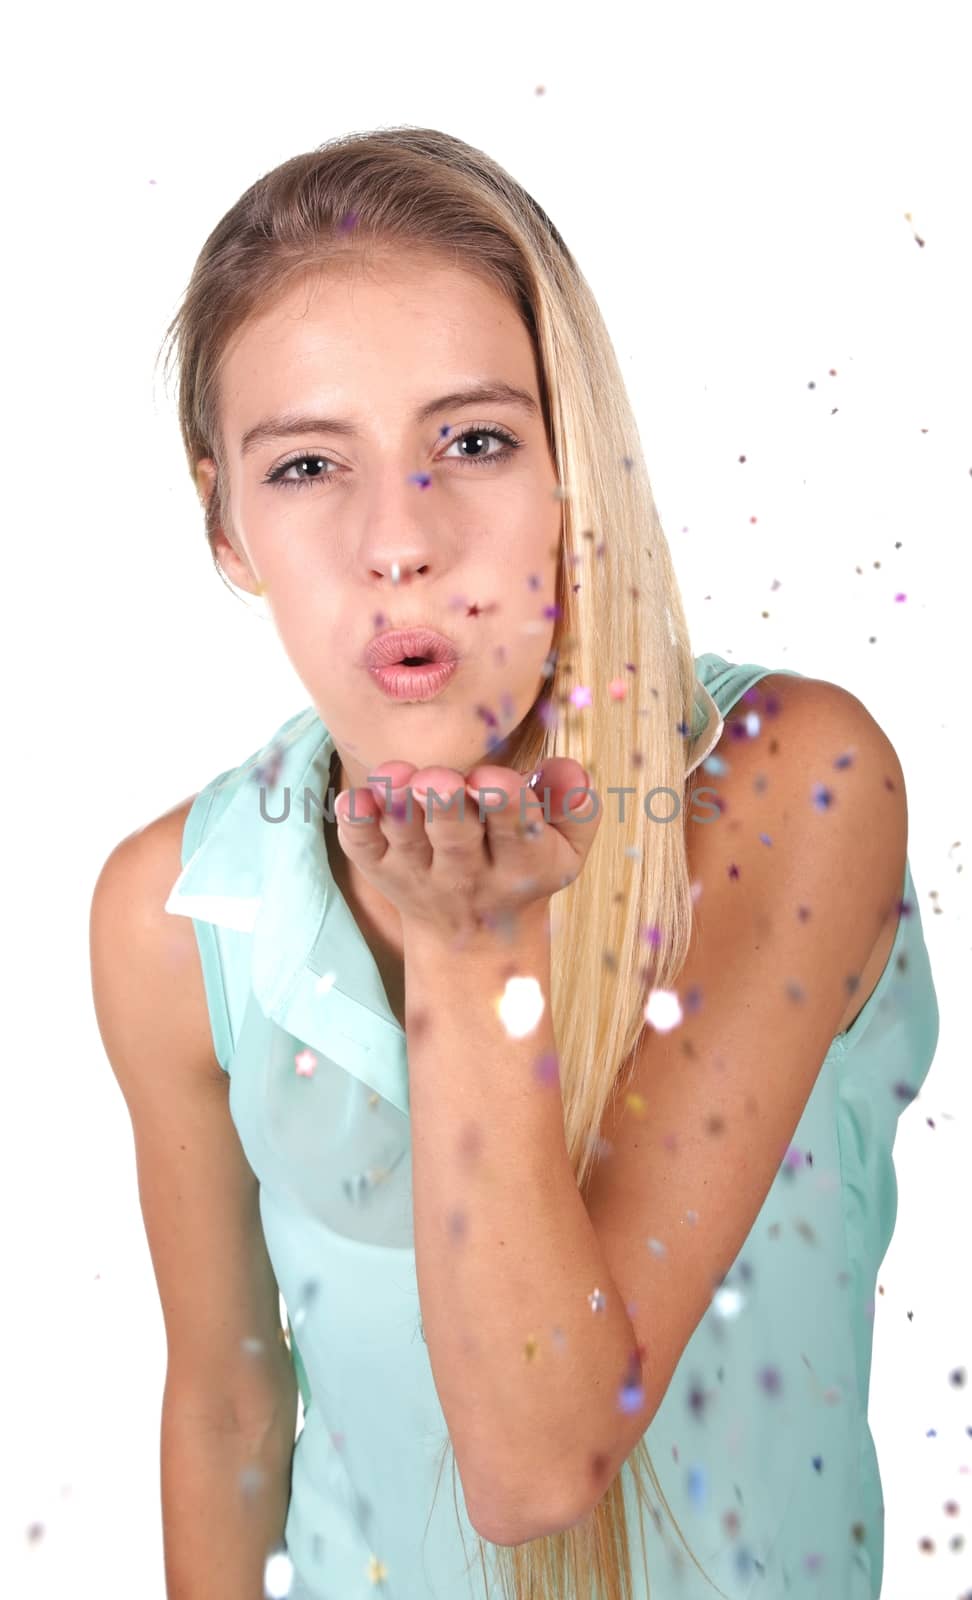 Lovely young blond lady blowing confetti out of her hand